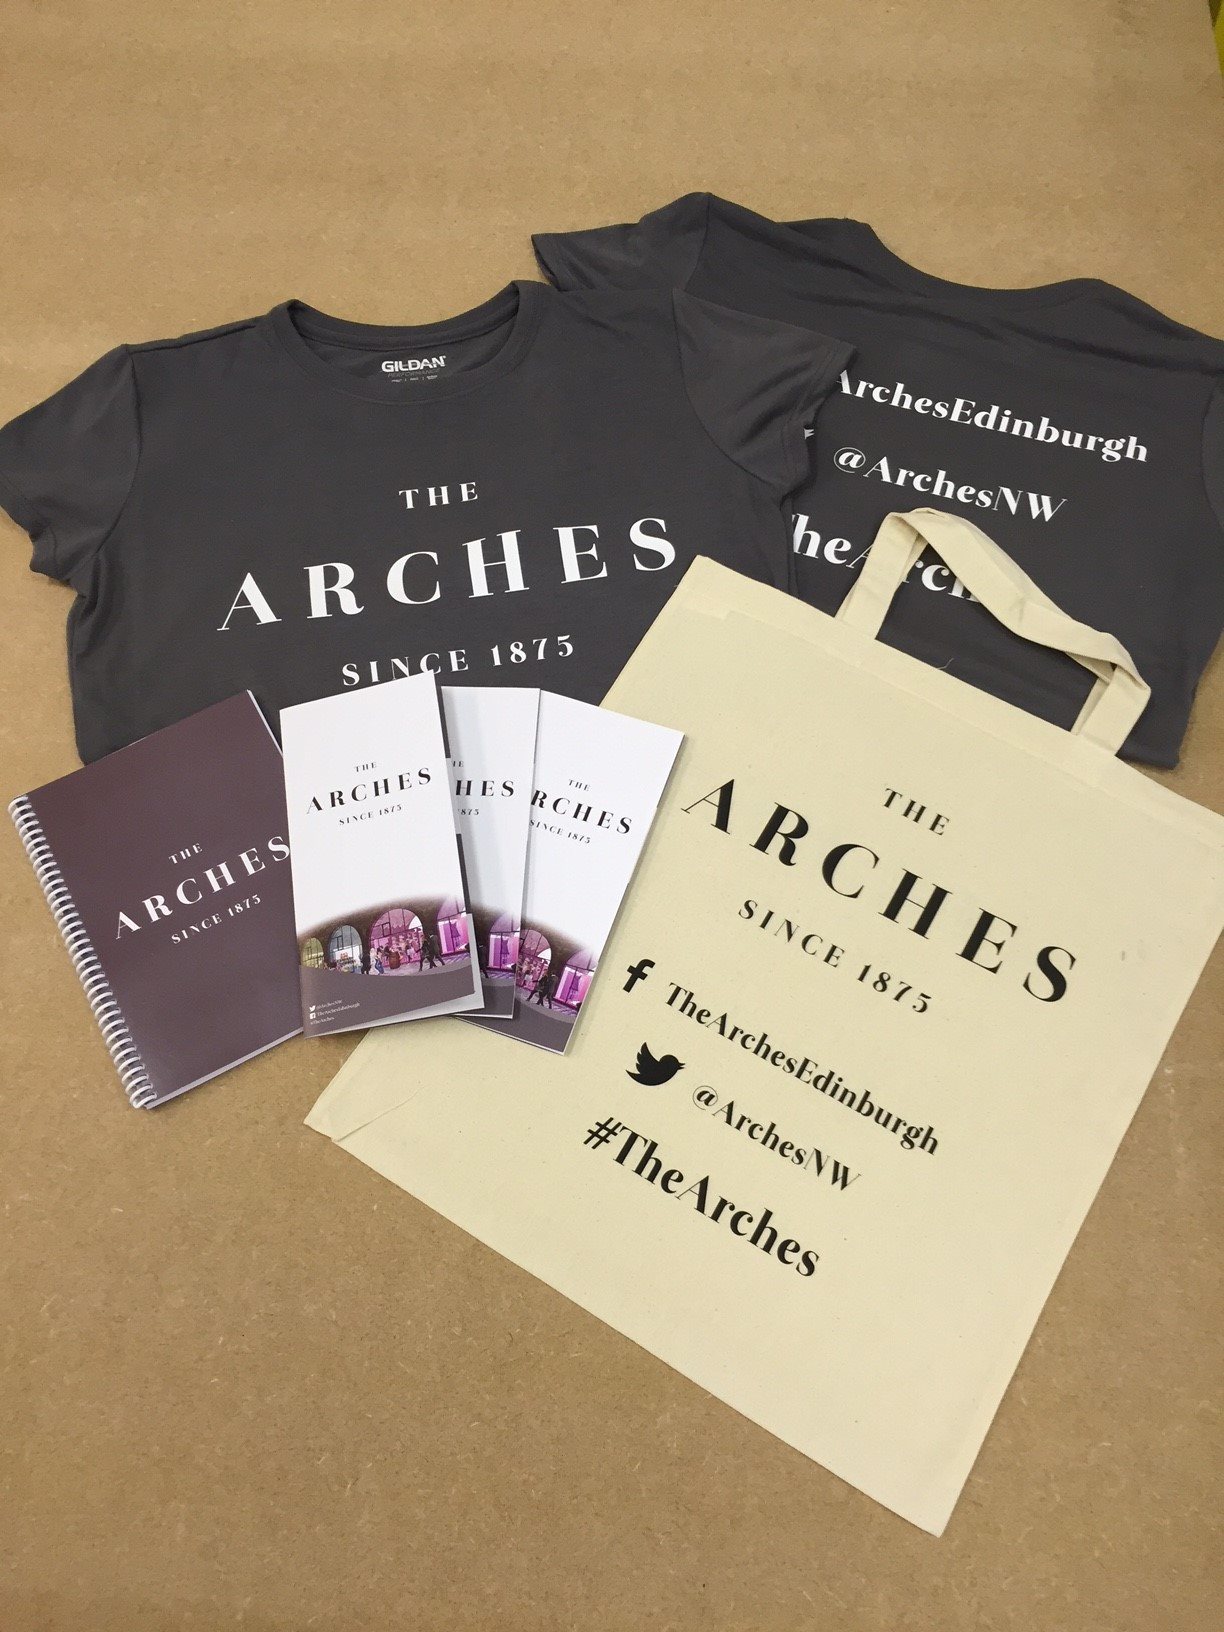 The Arches merchandise